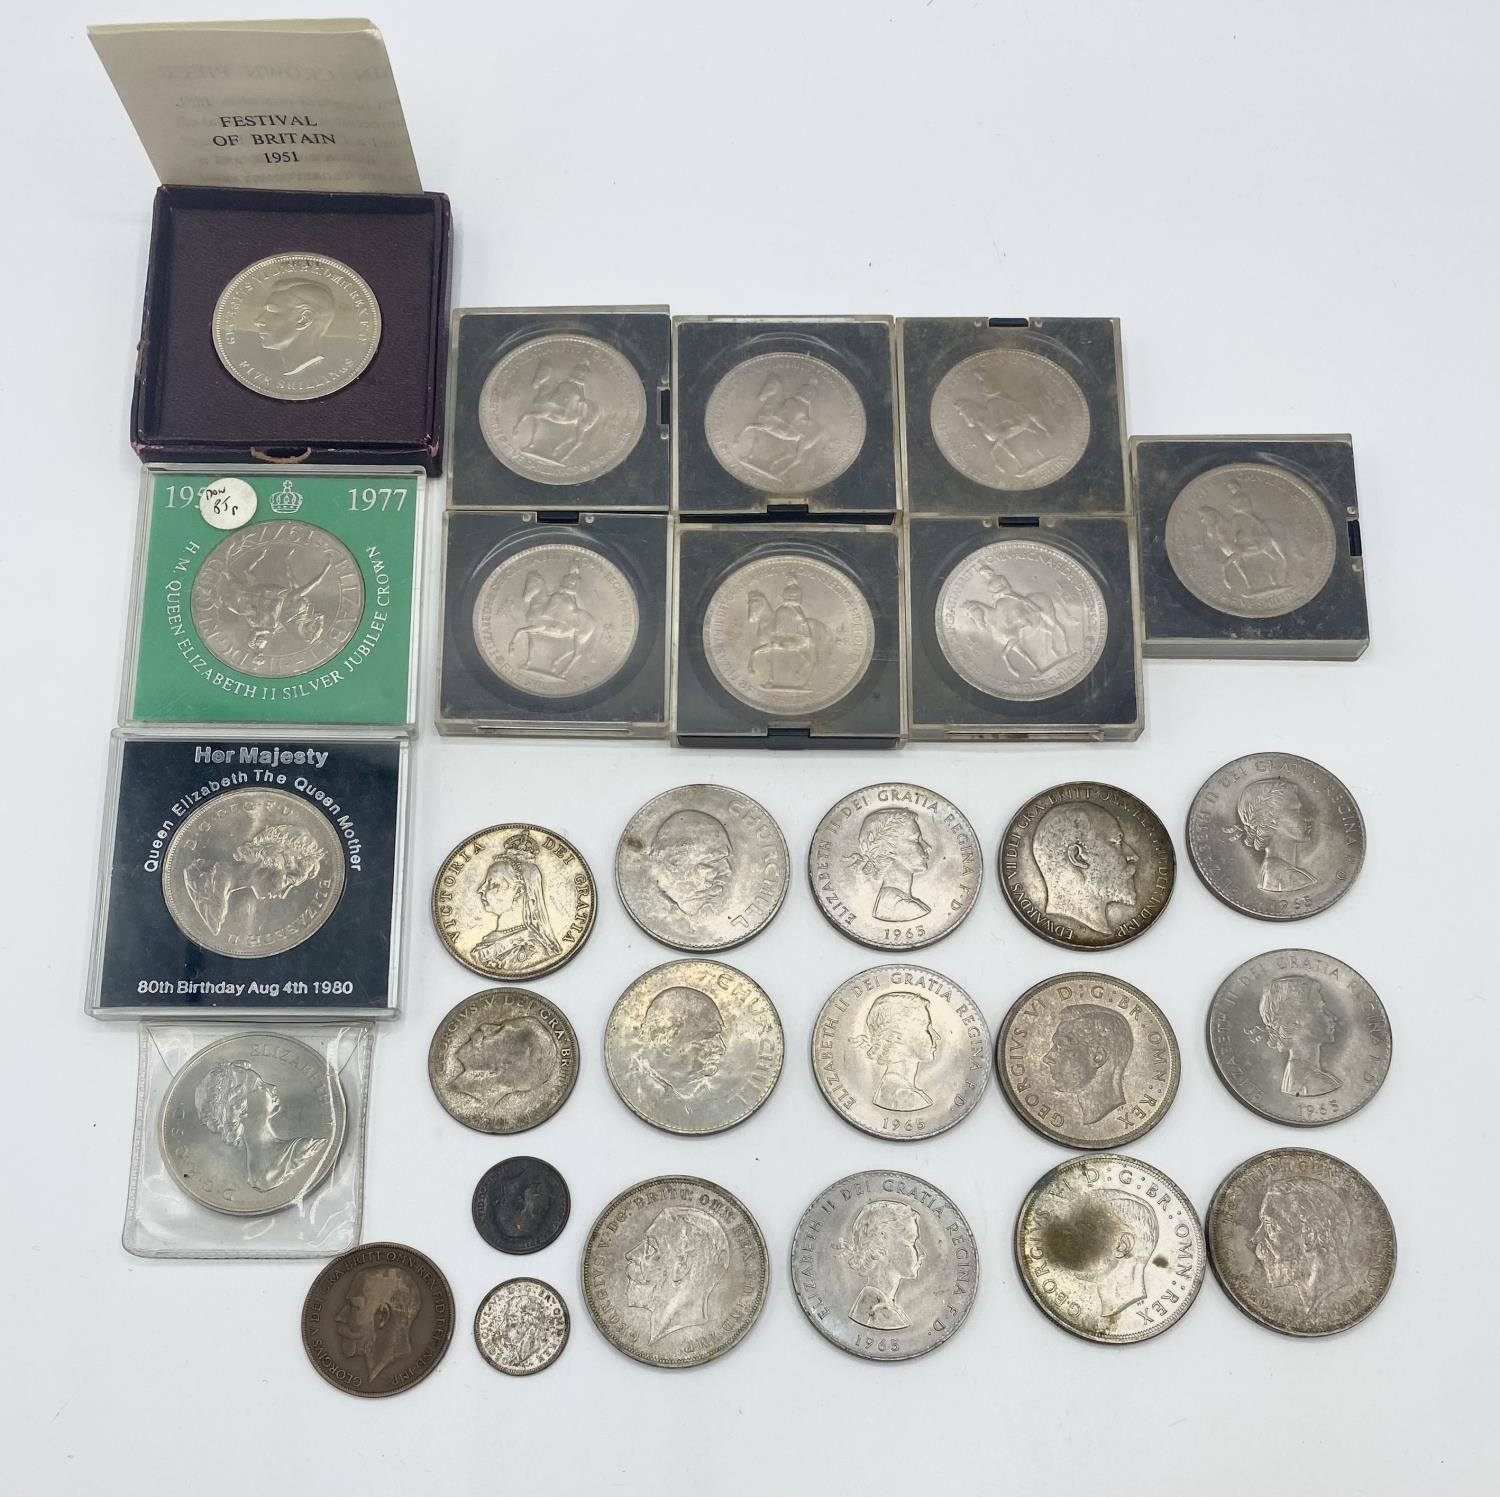 A collection of C20th coinage and commemorative coinage